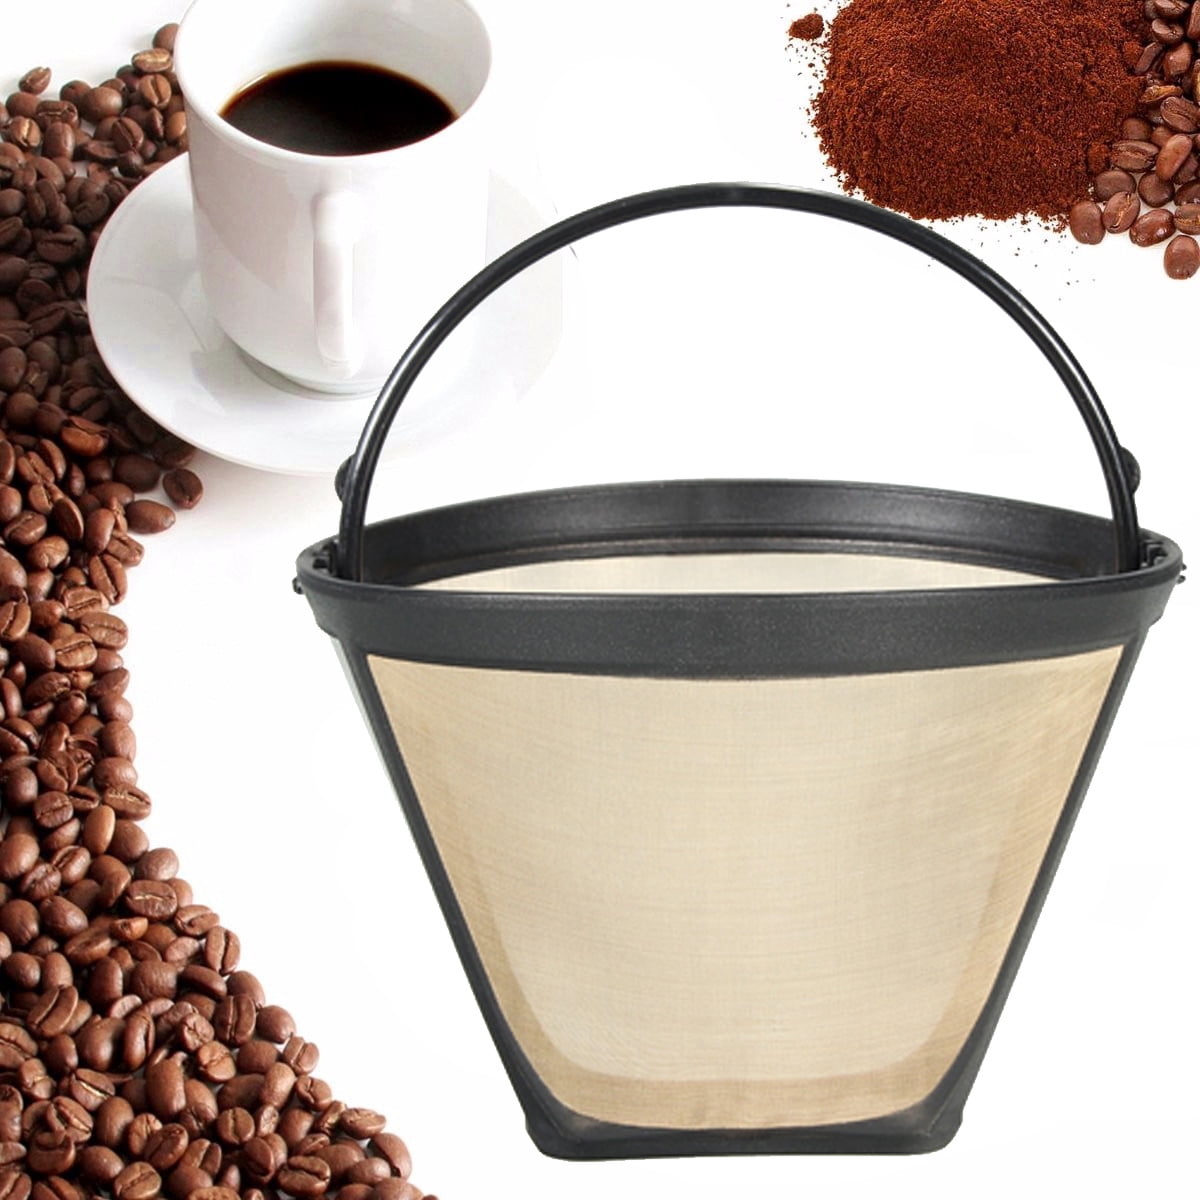 Permanent Reusable #4 Cone Shape Coffee Filter Mesh Basket Strainer Stainless 